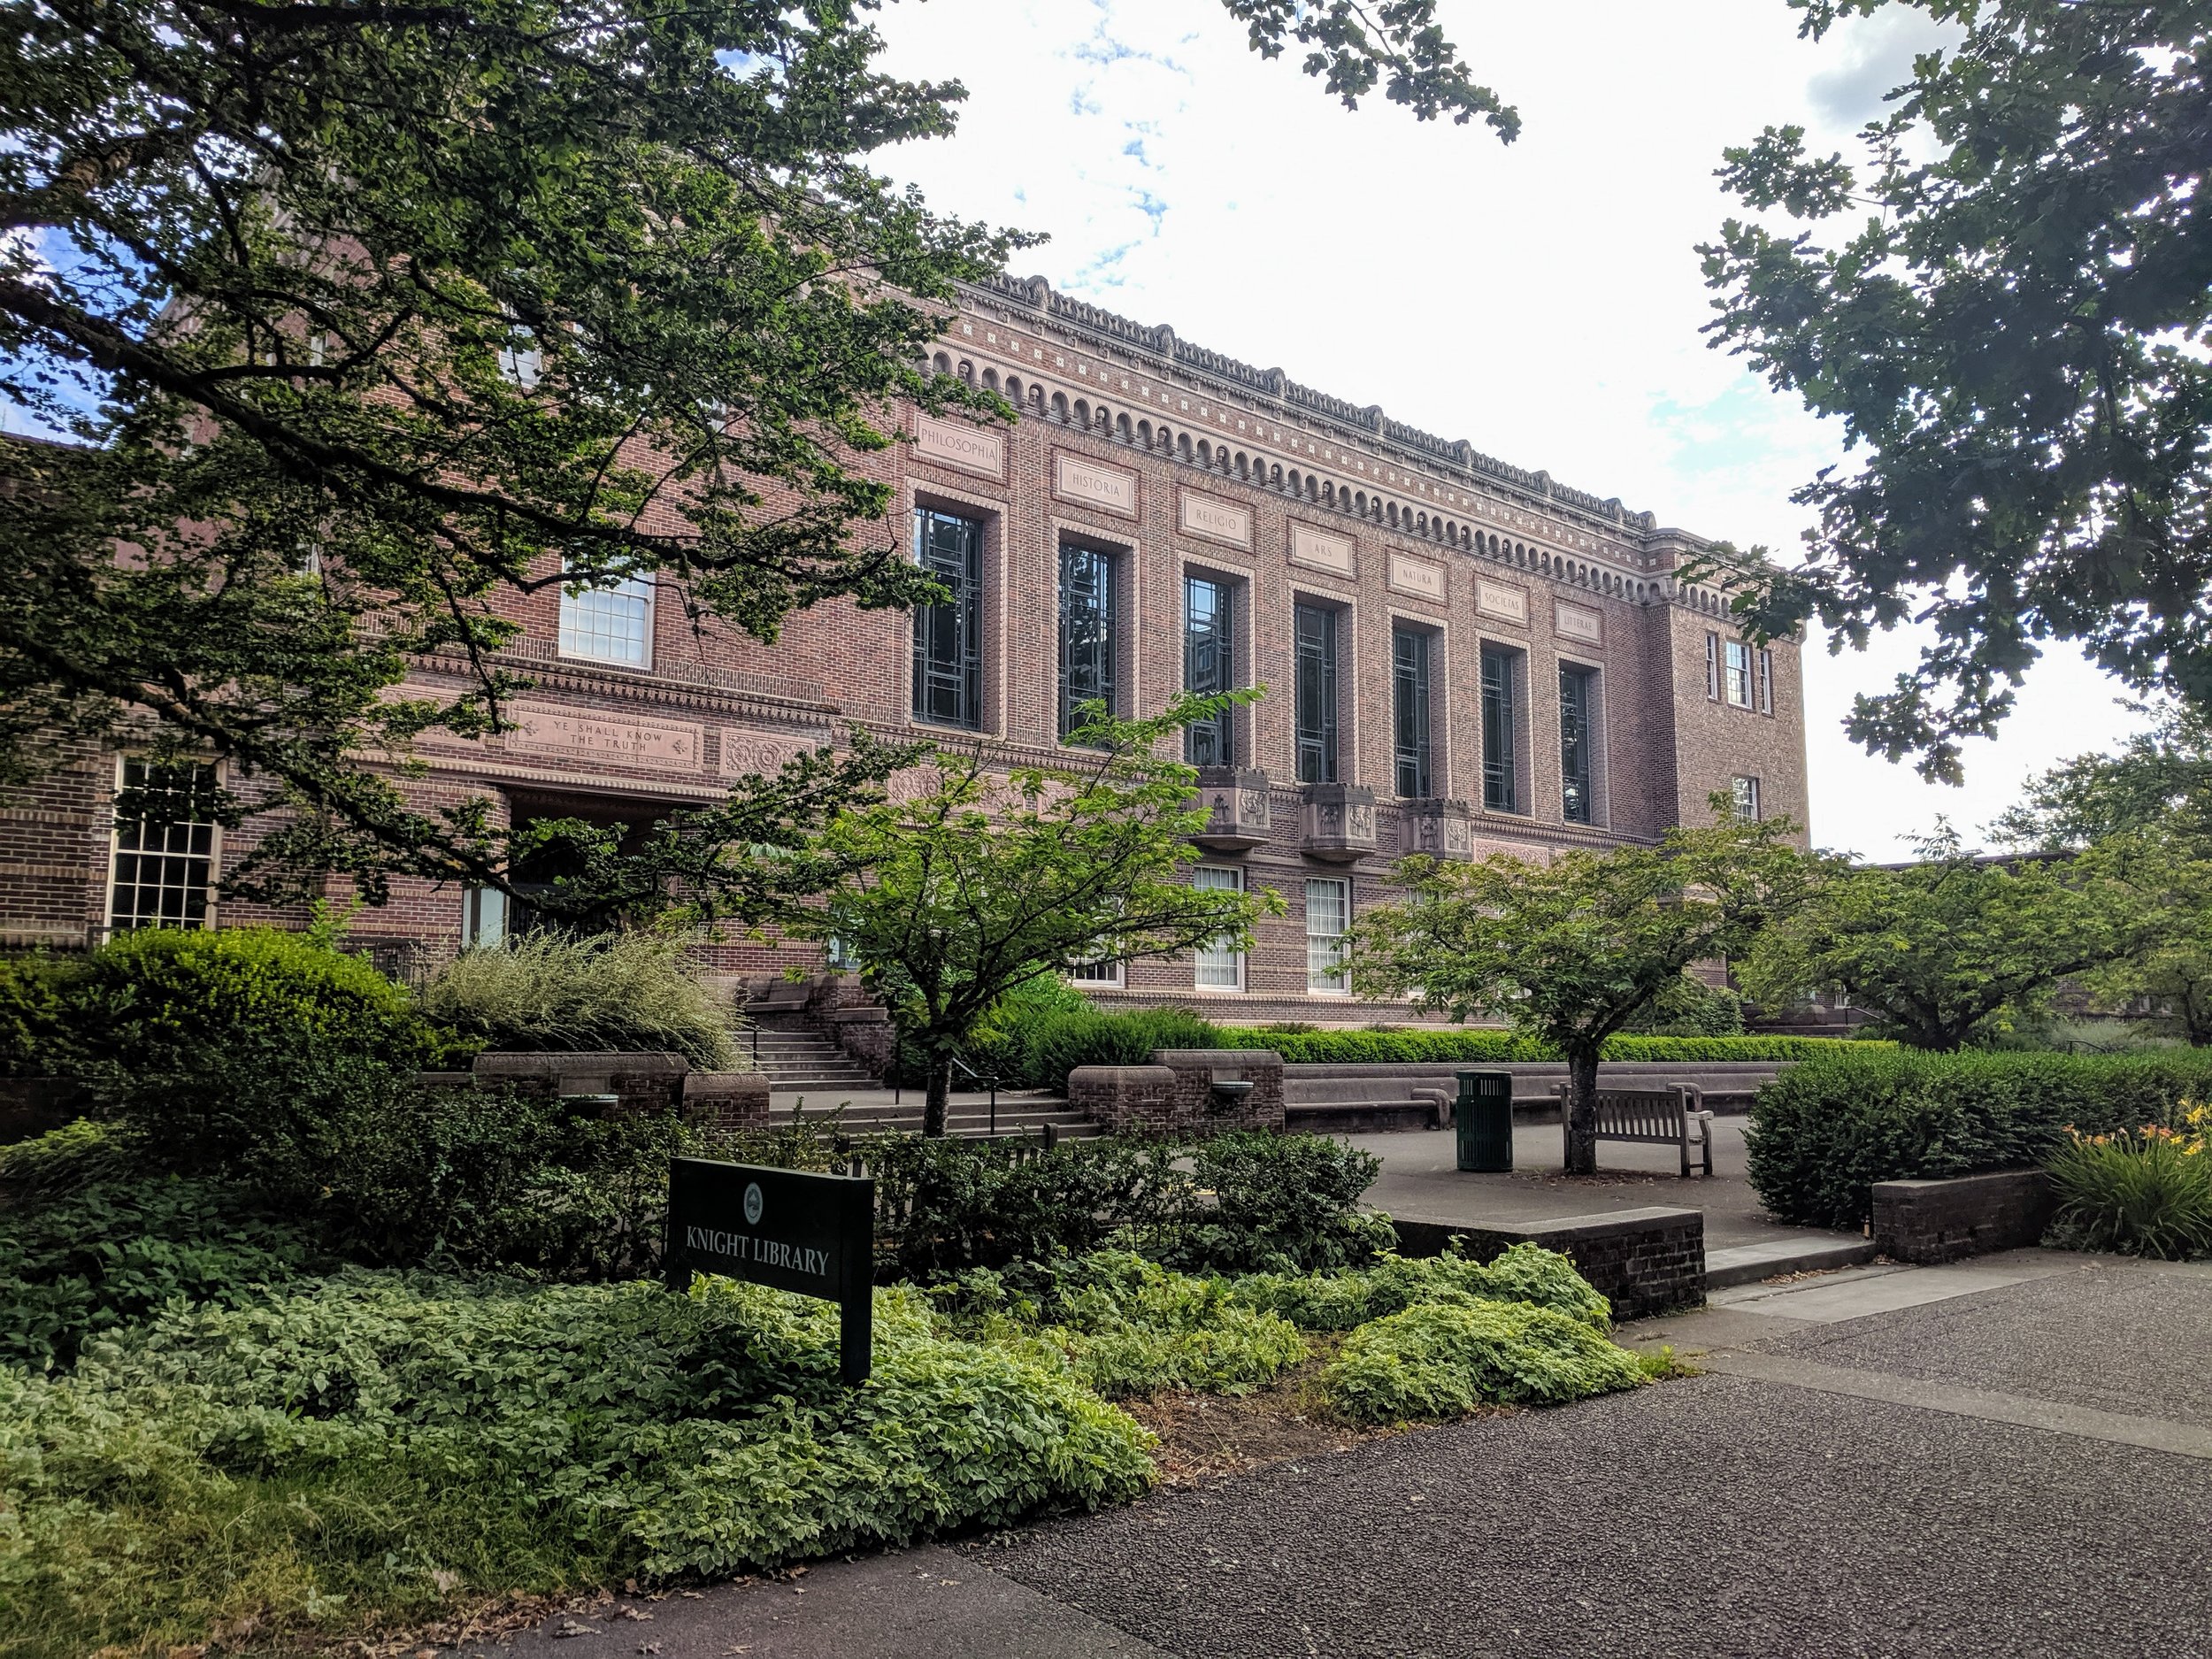  Knight Library at University of Oregon 